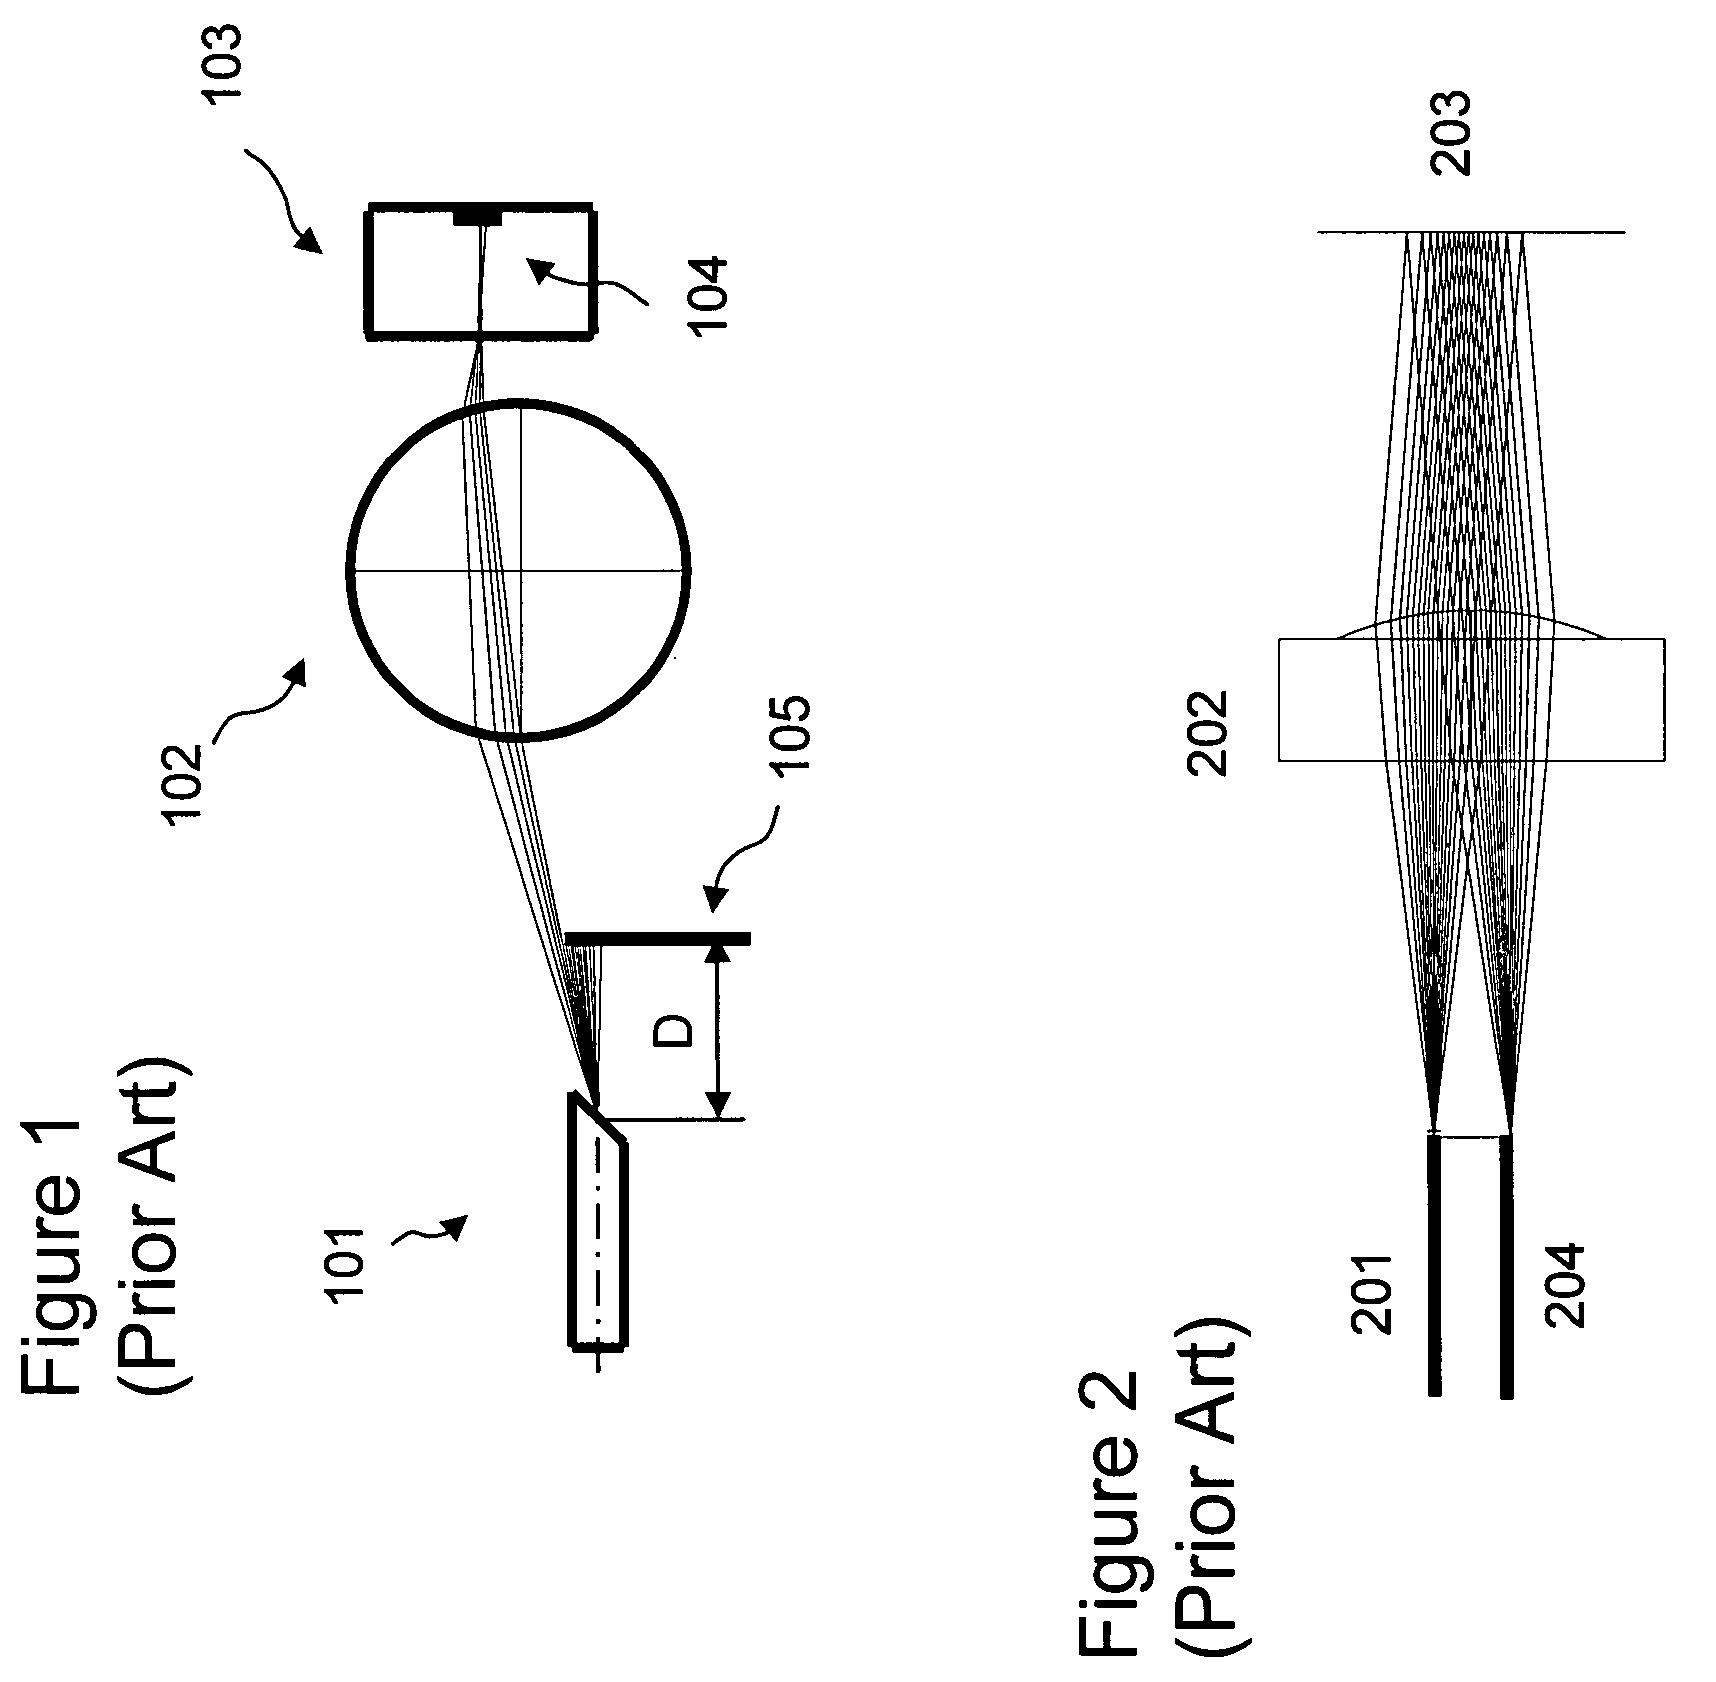 High dynamic range integrated receiver